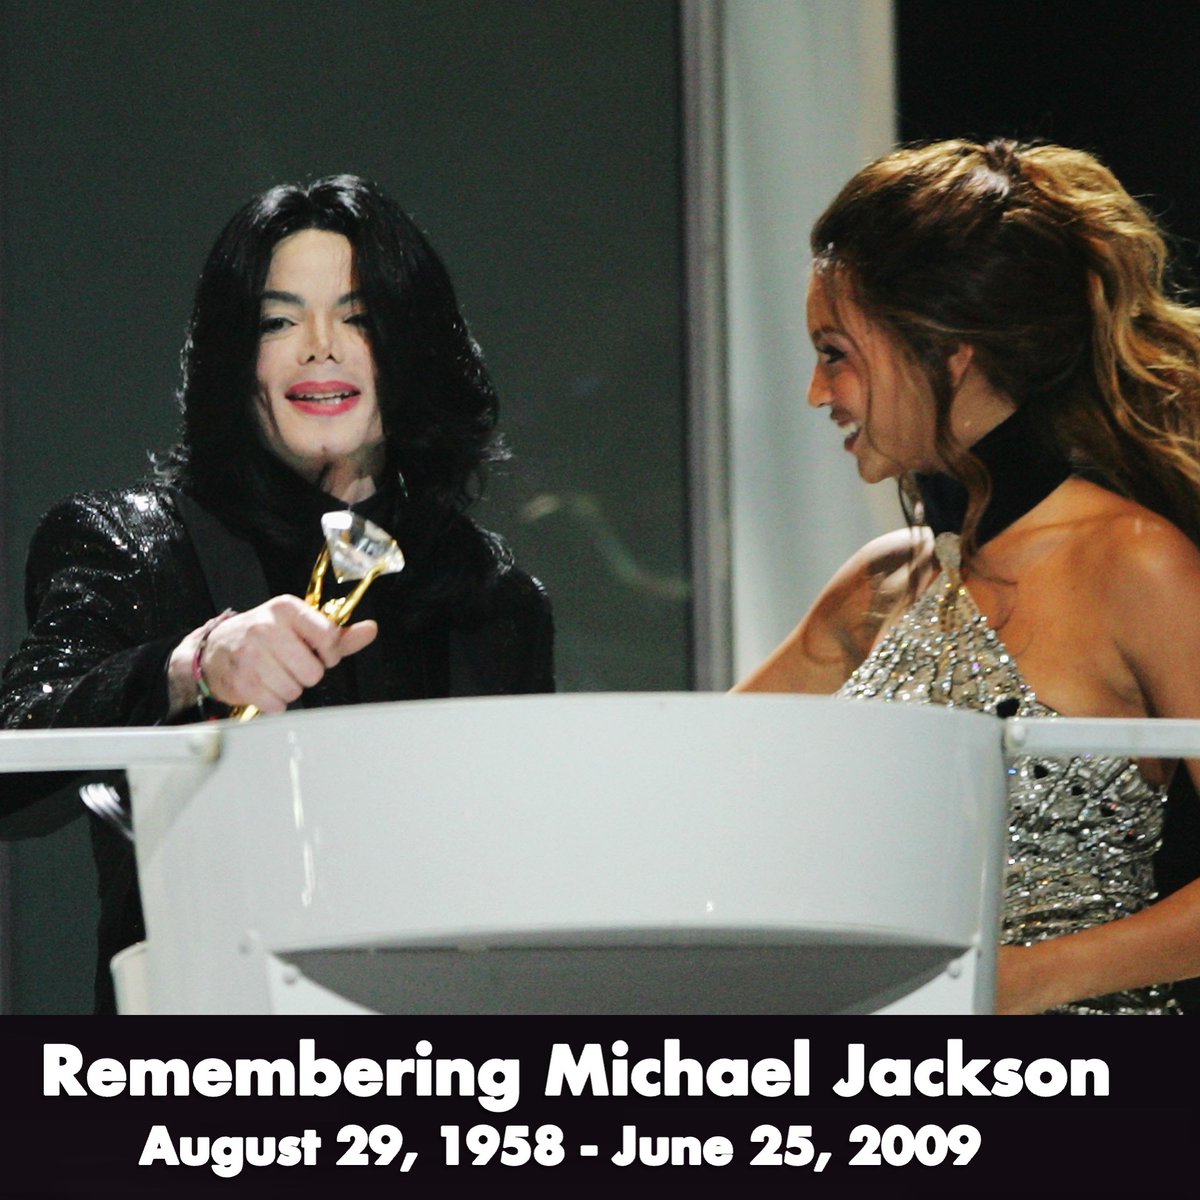 Remembering #MichaelJackson, the King of Pop and the Greatest Entertainer of All Time, on the 14th anniversary of his passing! 🐐👑🕊️❤️
🔗: youtube.com/watch?v=r7NSLs…

#14YearsWithoutMichaelJackson #14YearsWithoutMJ
#MJ #KingofPop